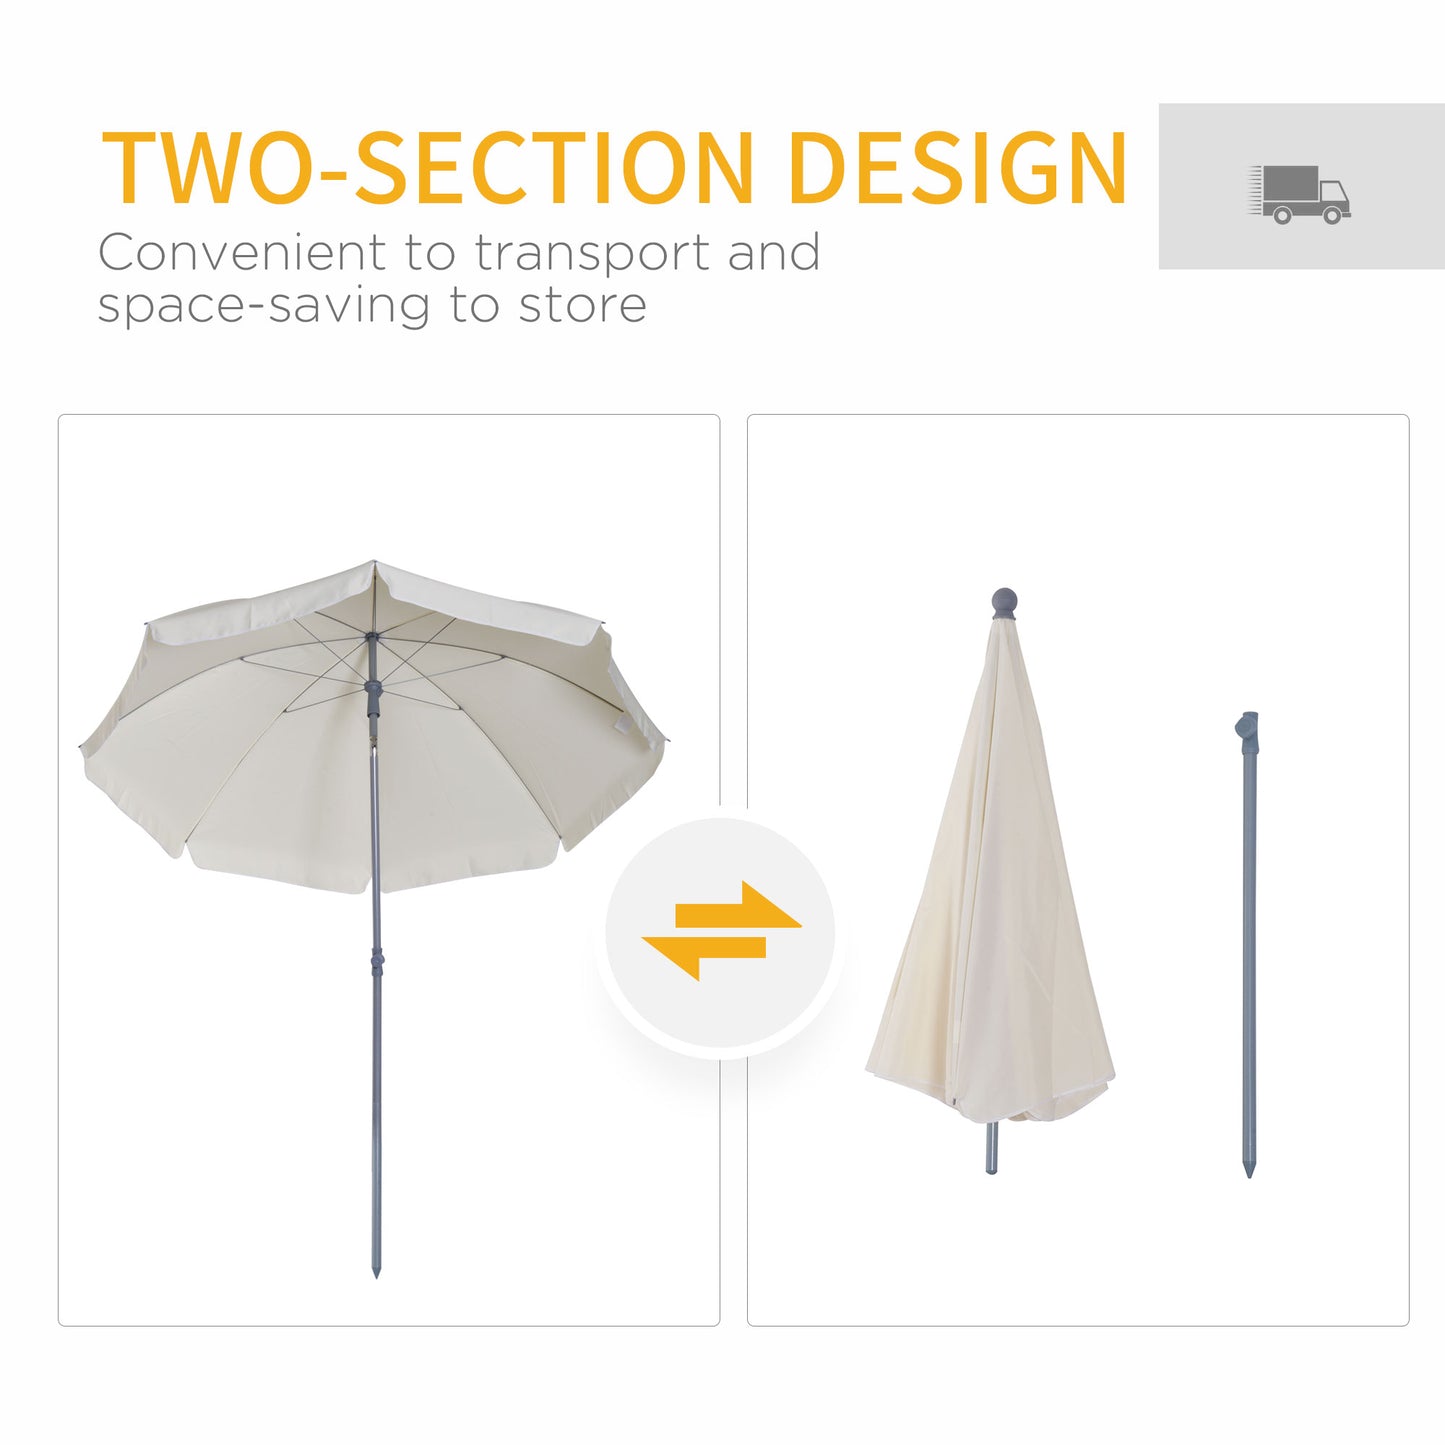 Outsunny Adjustable Beach Parasol: Elegant Cream Shade for Outdoor Relaxation, 2.2M